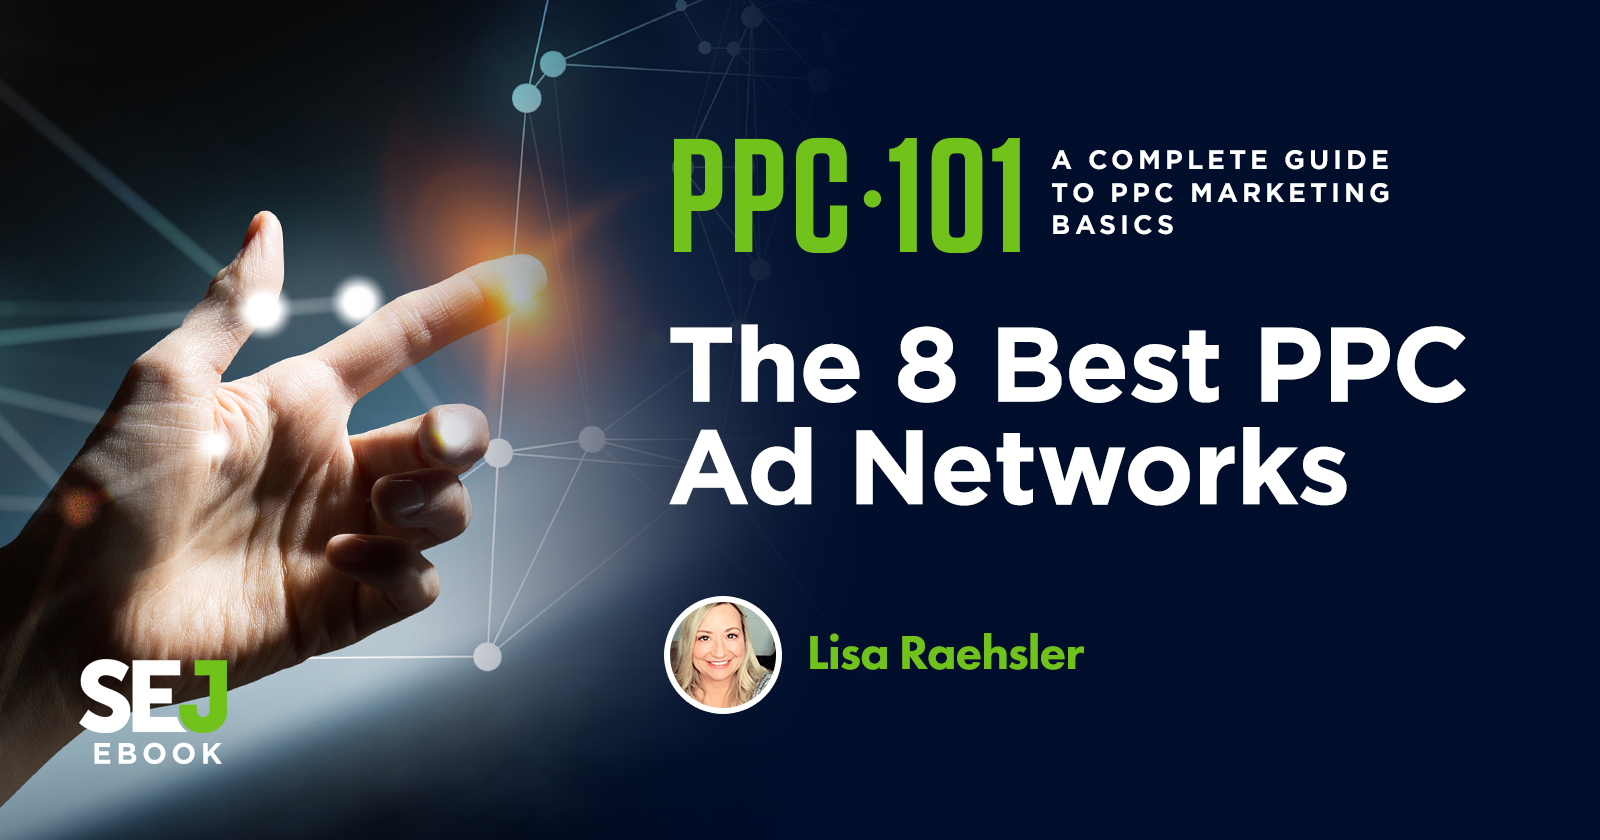 retort Bourgeon Forfærdeligt The 8 Best PPC Ad Networks